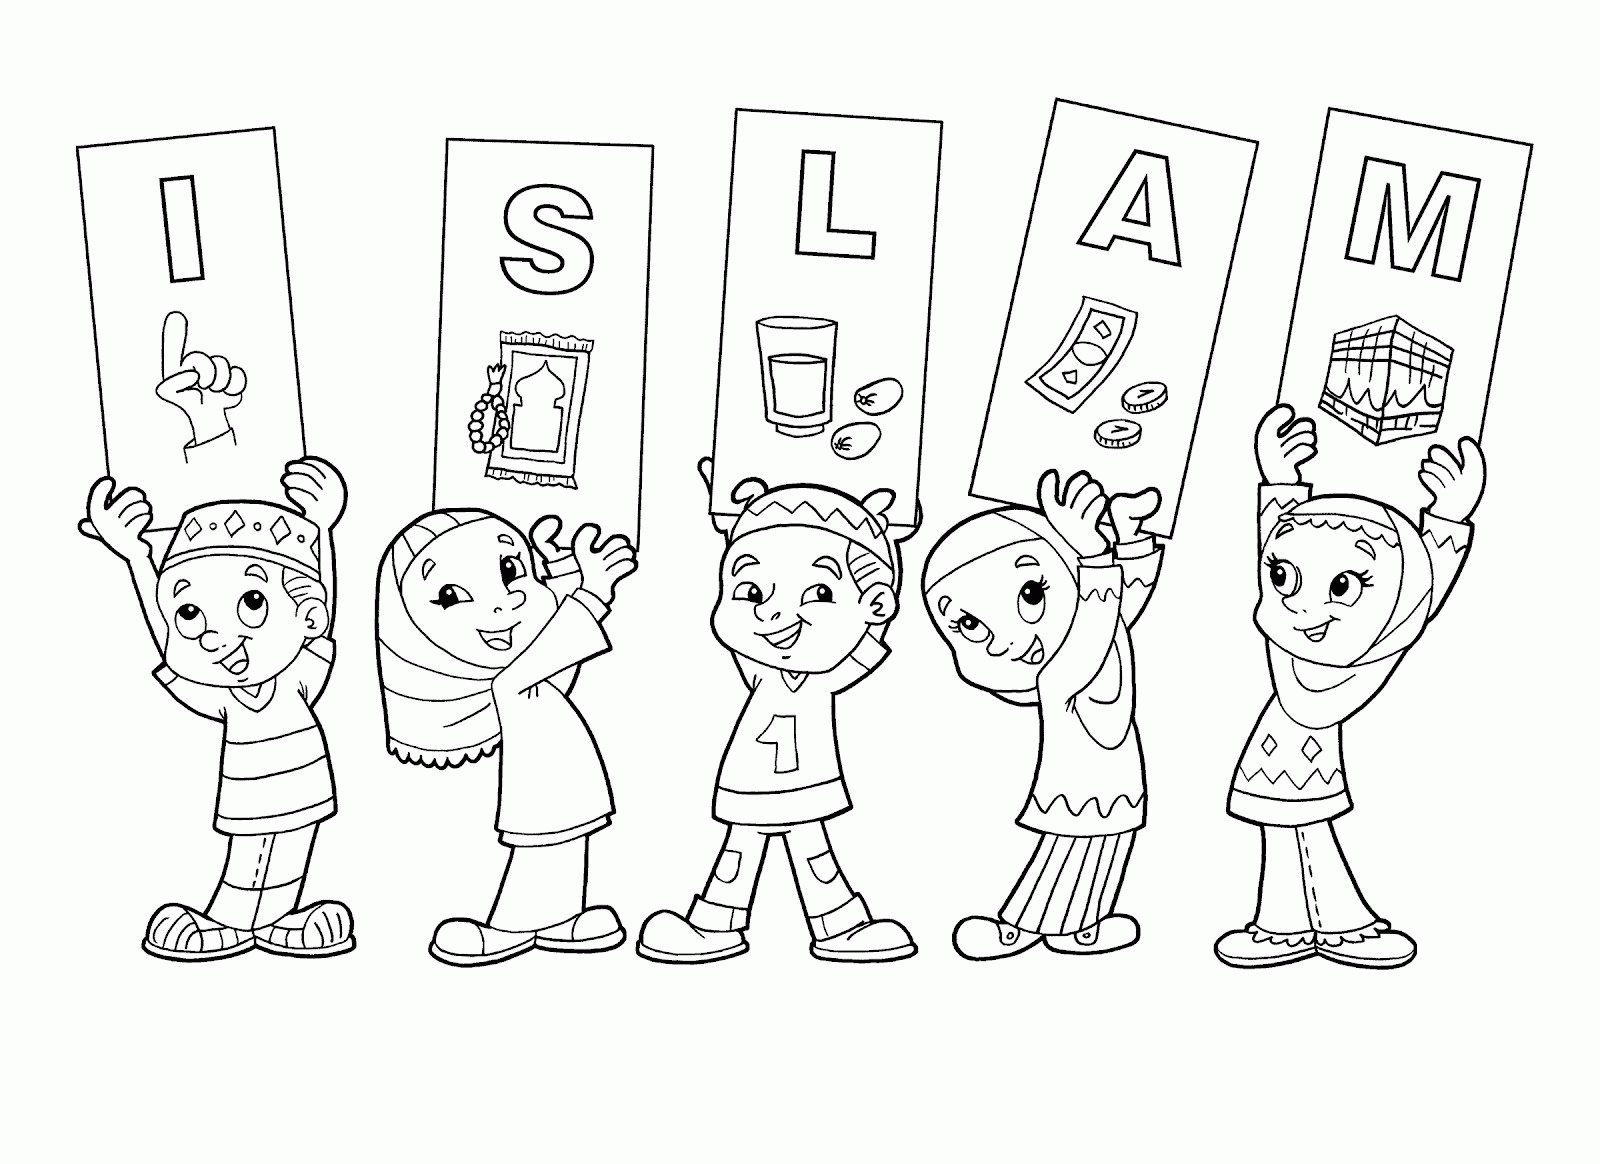 Coloring Pages For Kids+islamic - 123 Free Coloring Pages